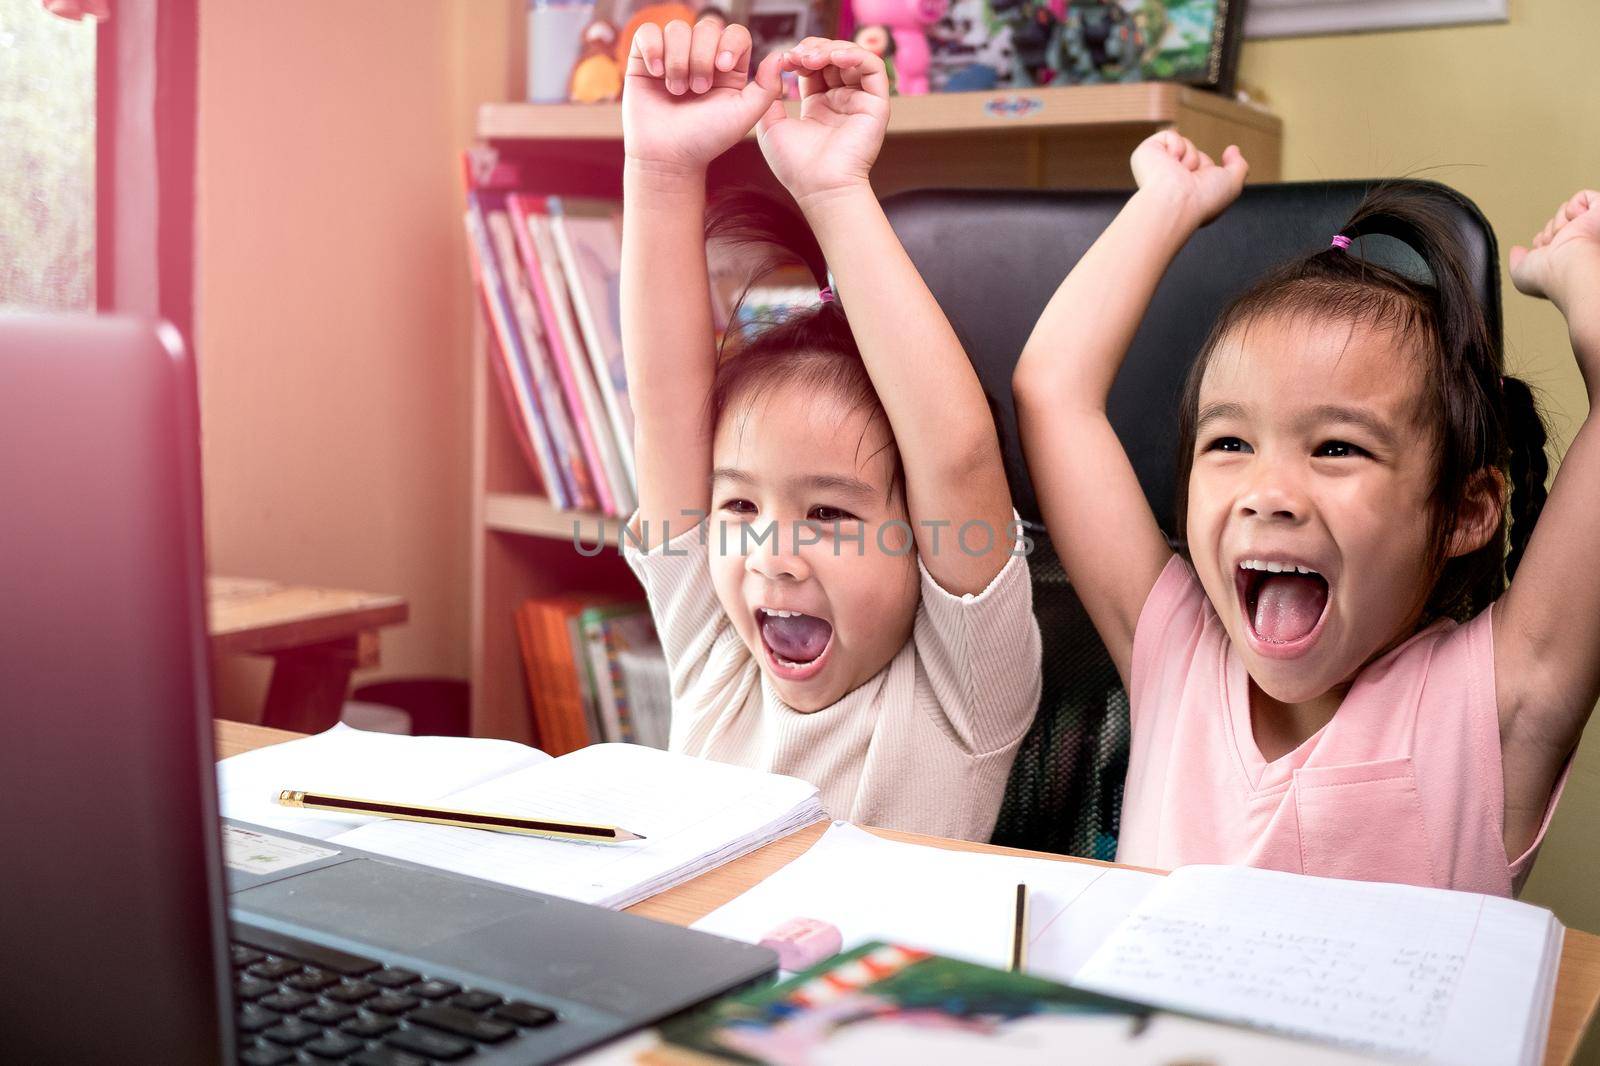 Two little schoolgirls studying homework math during her online lesson at home, social distancing during the coronavirus outbreak. Concept of online education or home schooler. by TEERASAK